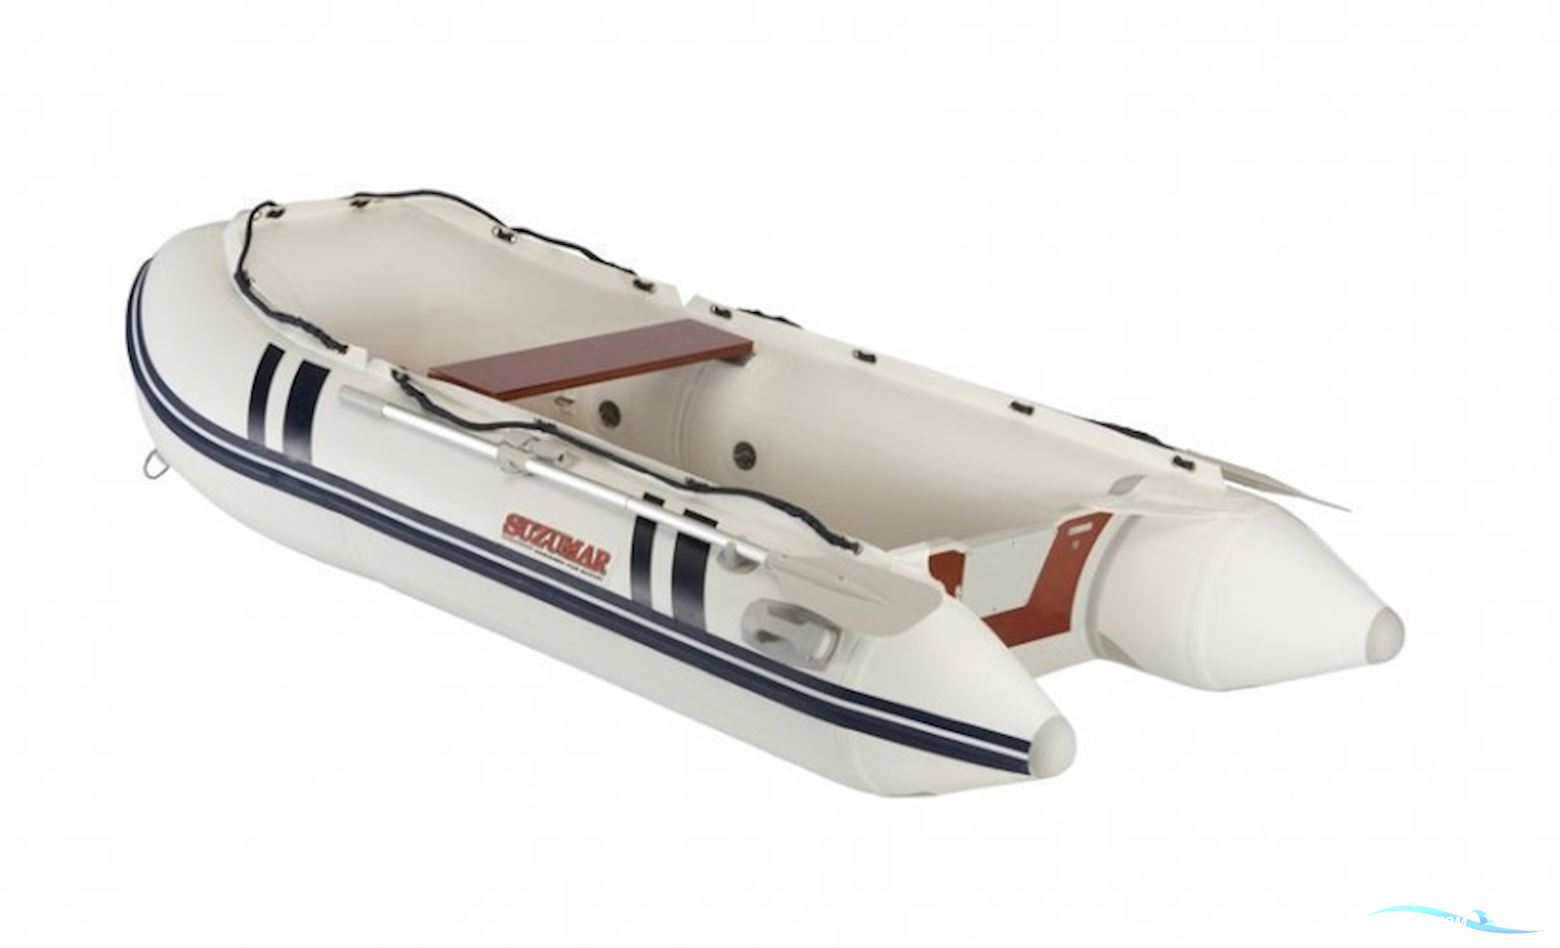 Suzumar DS 360 Alu Inflatable / Rib 2023, The Netherlands